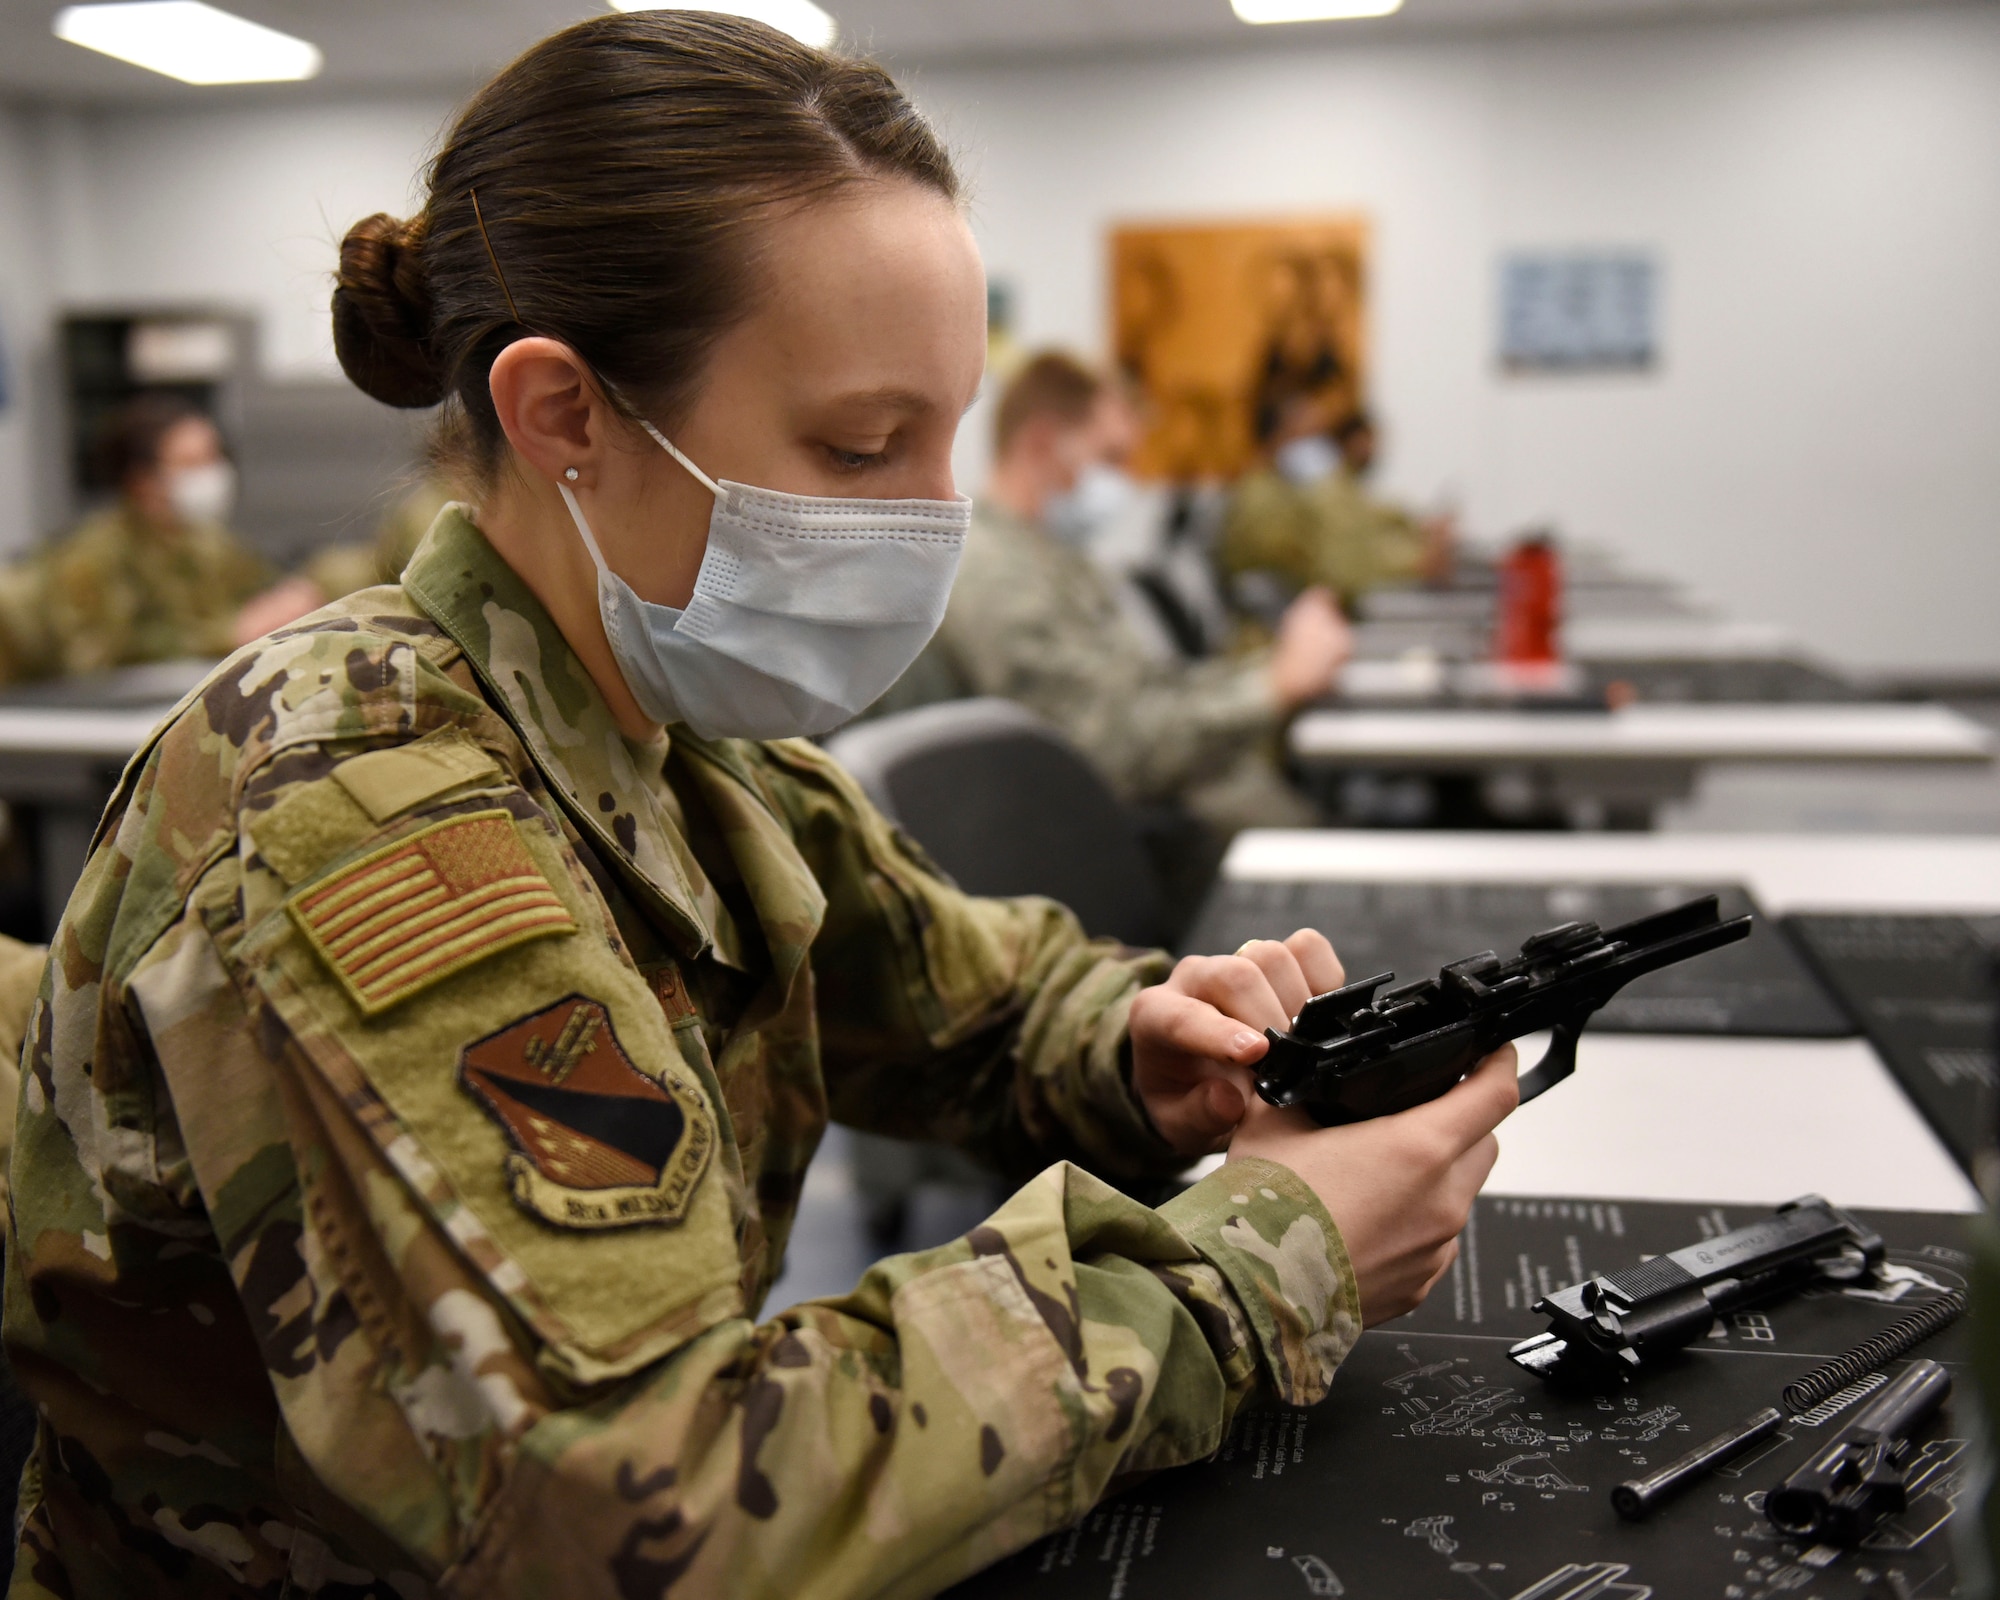 Air Force 2nd Lt. Mariah Armstrong, an 88th Medical Group critical care nurse, practices disassembling the M9 pistol during a qualification course at Wright-Patterson Air Force Base, Ohio on Feb. 18, 2021. Weapons qualification is part of the readiness standards for the 88th Air Base Wing. No live ammunition is allowed in the classroom portion of the qualification course. (U.S. Air Force photo by Ty Greenlees)